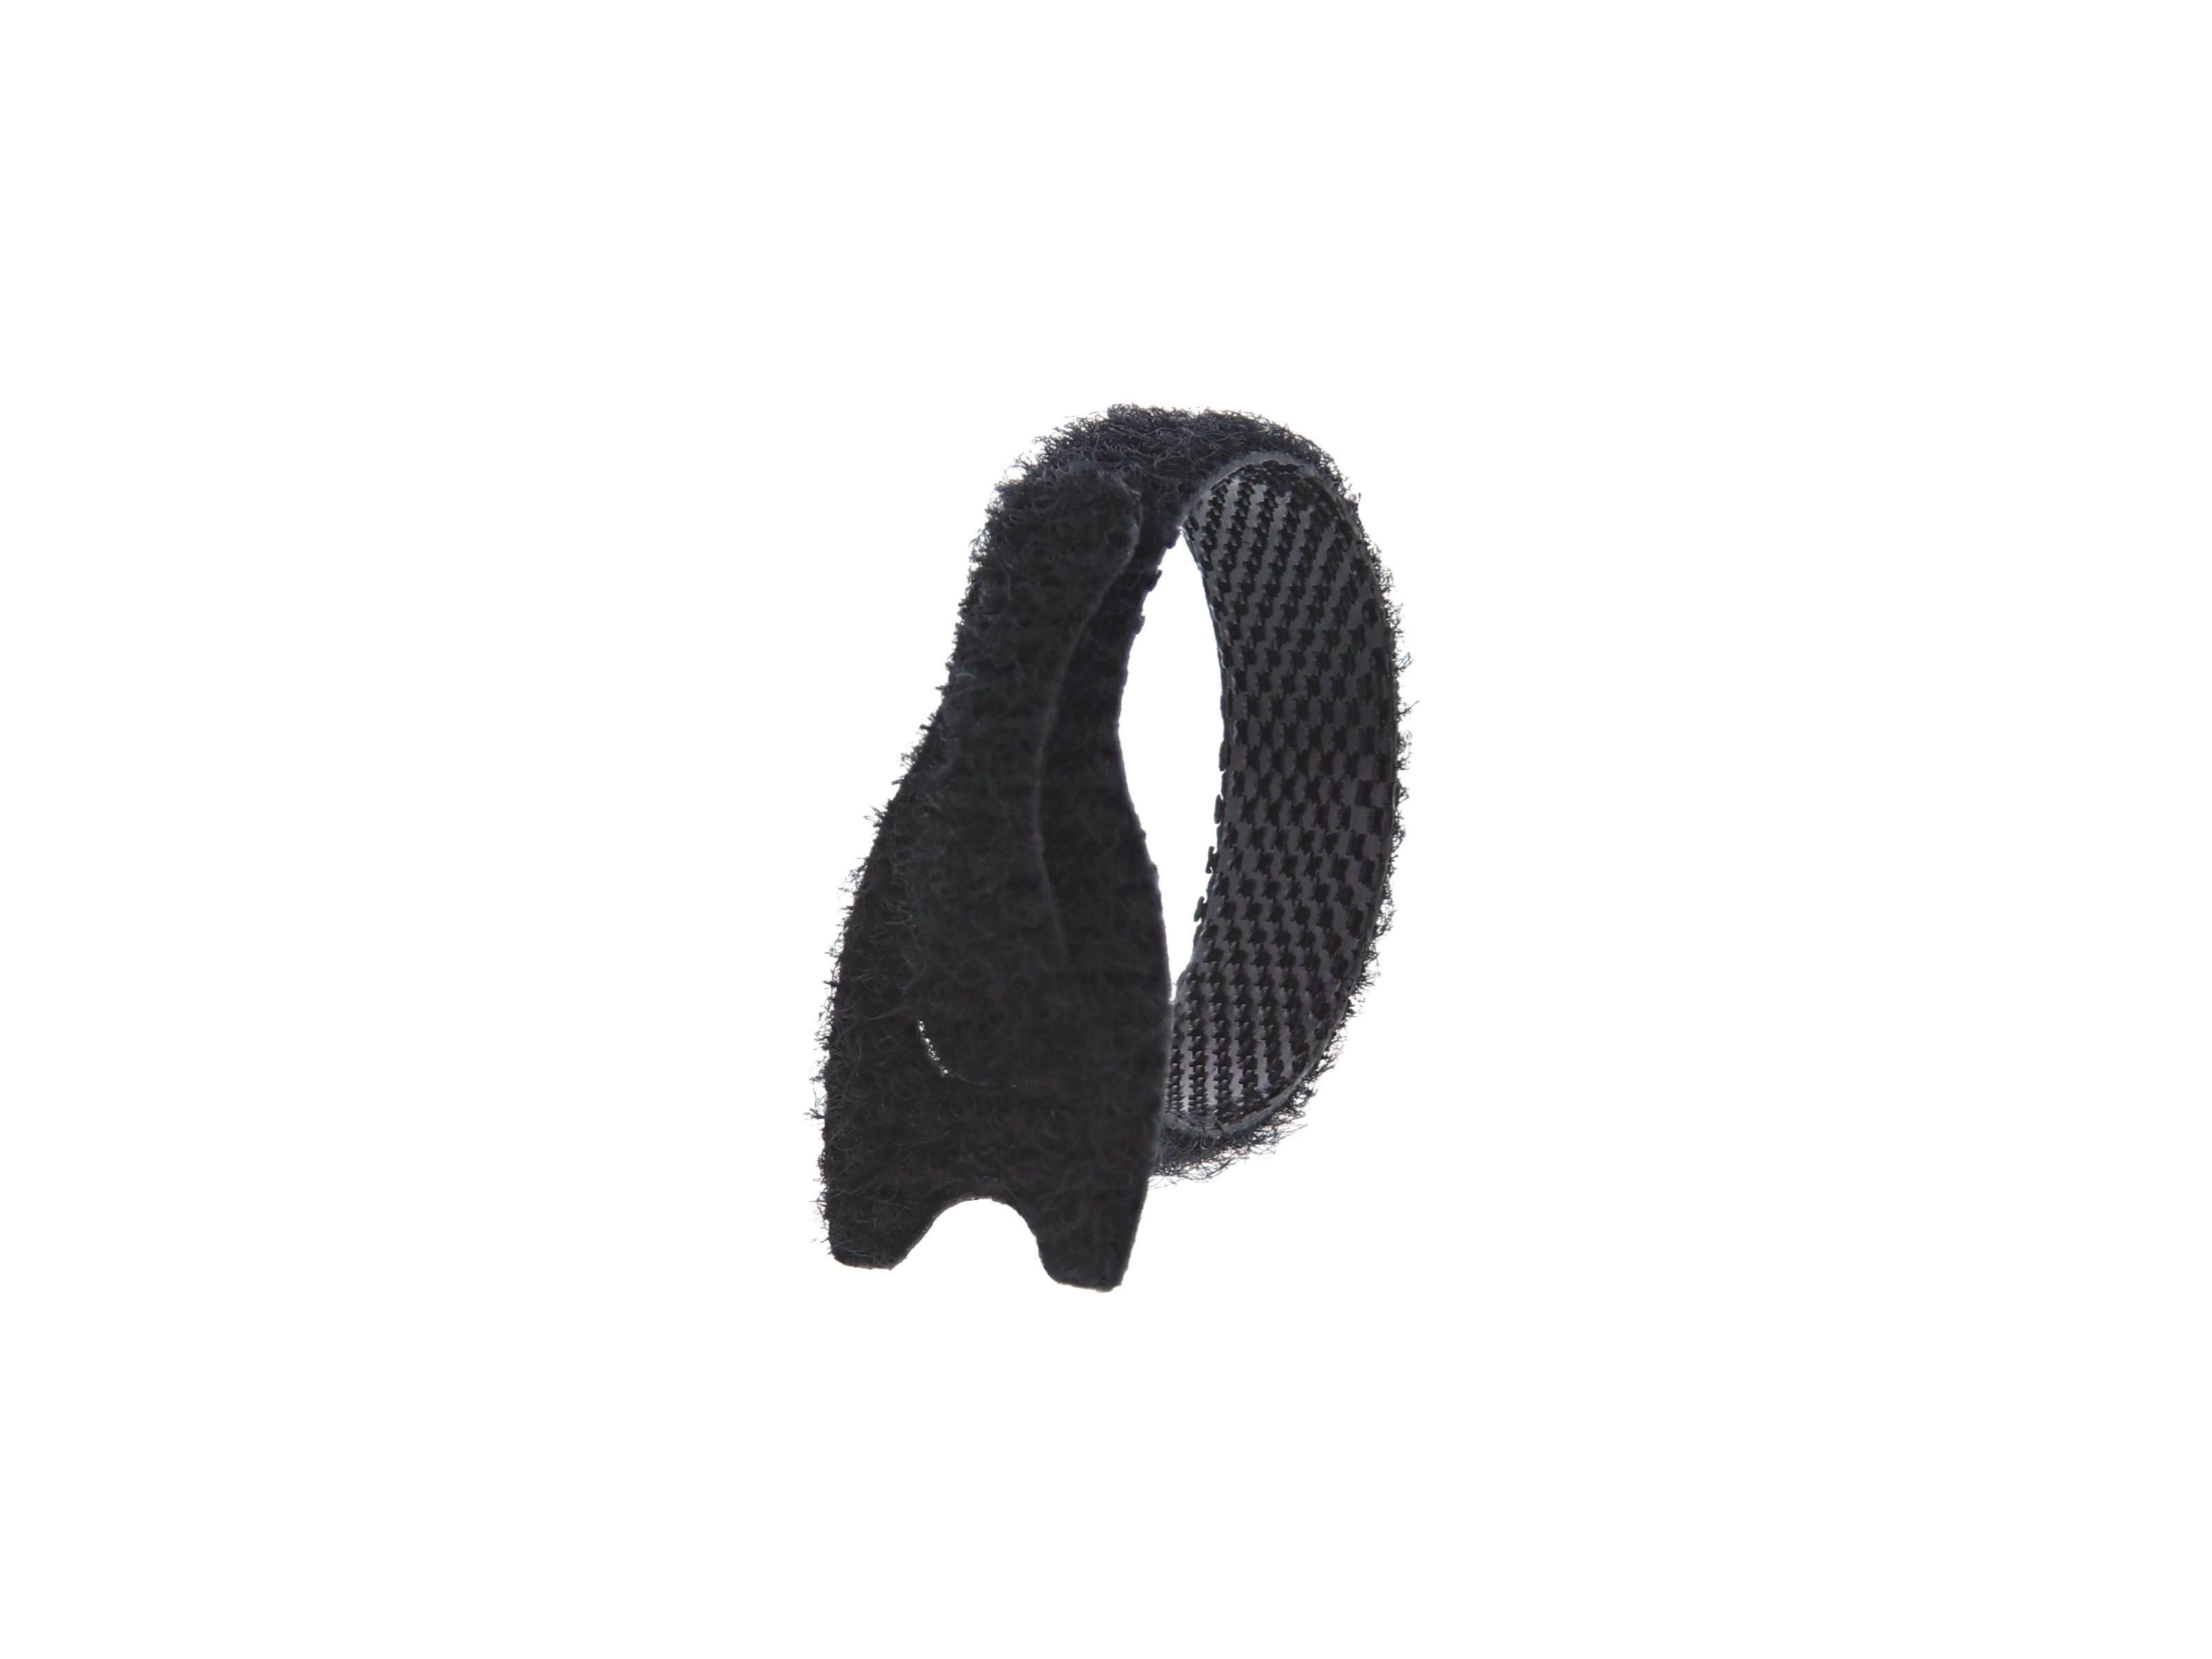 3 1/2 Inch Black Reuseable Tie Wrap - 7 Pack at Cables N More